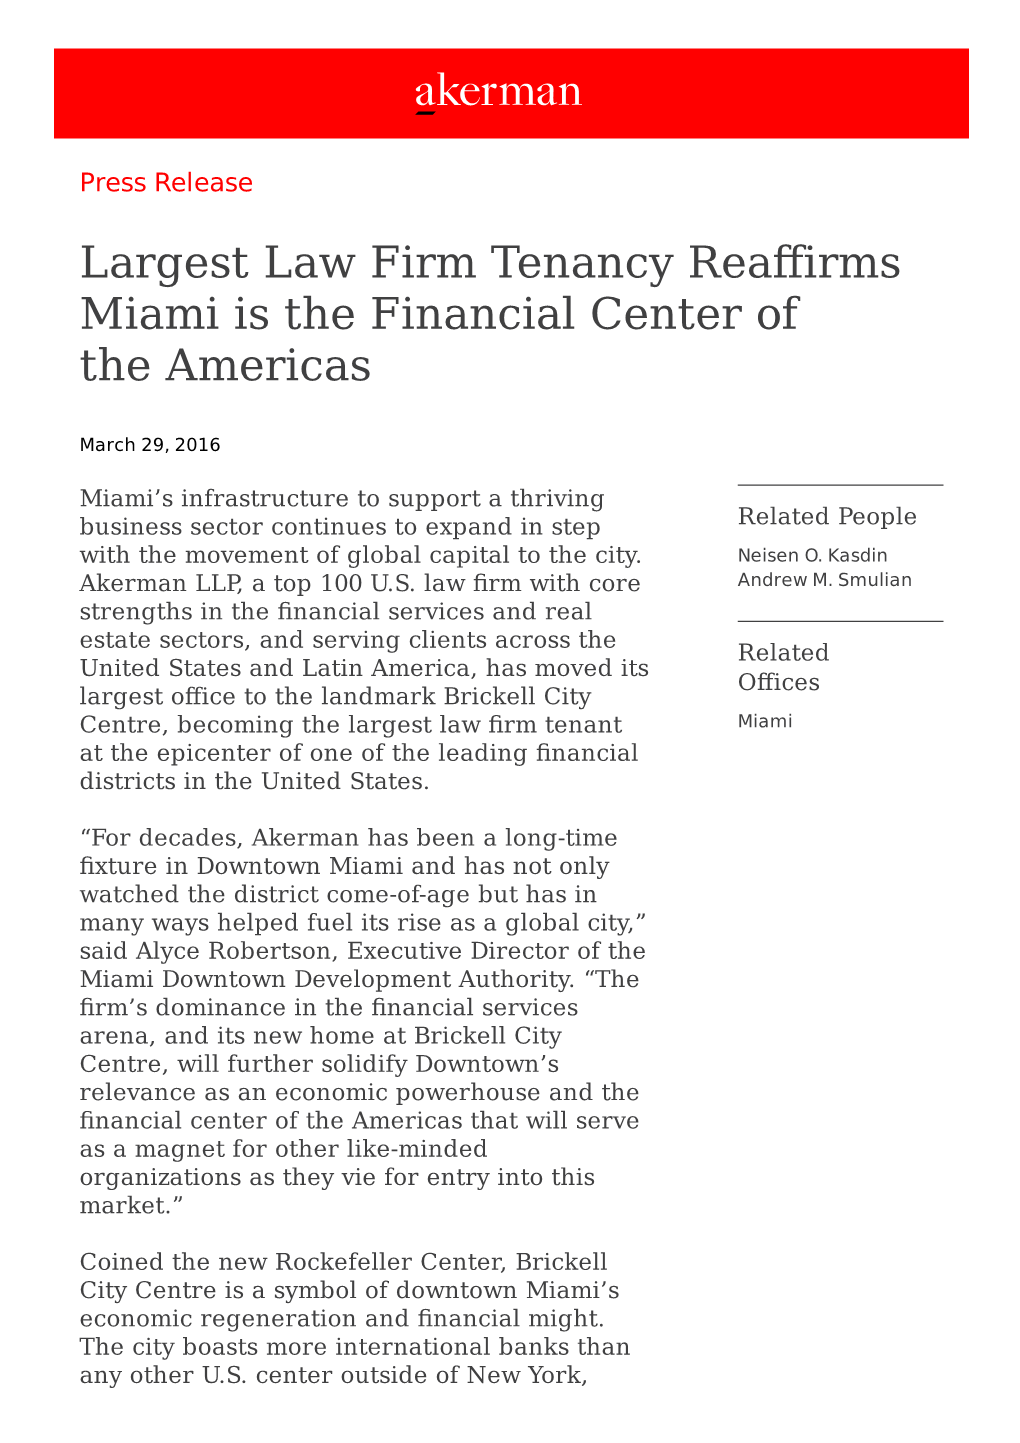 Largest Law Firm Tenancy Reaffirms Miami Is the Financial Center of the Americas